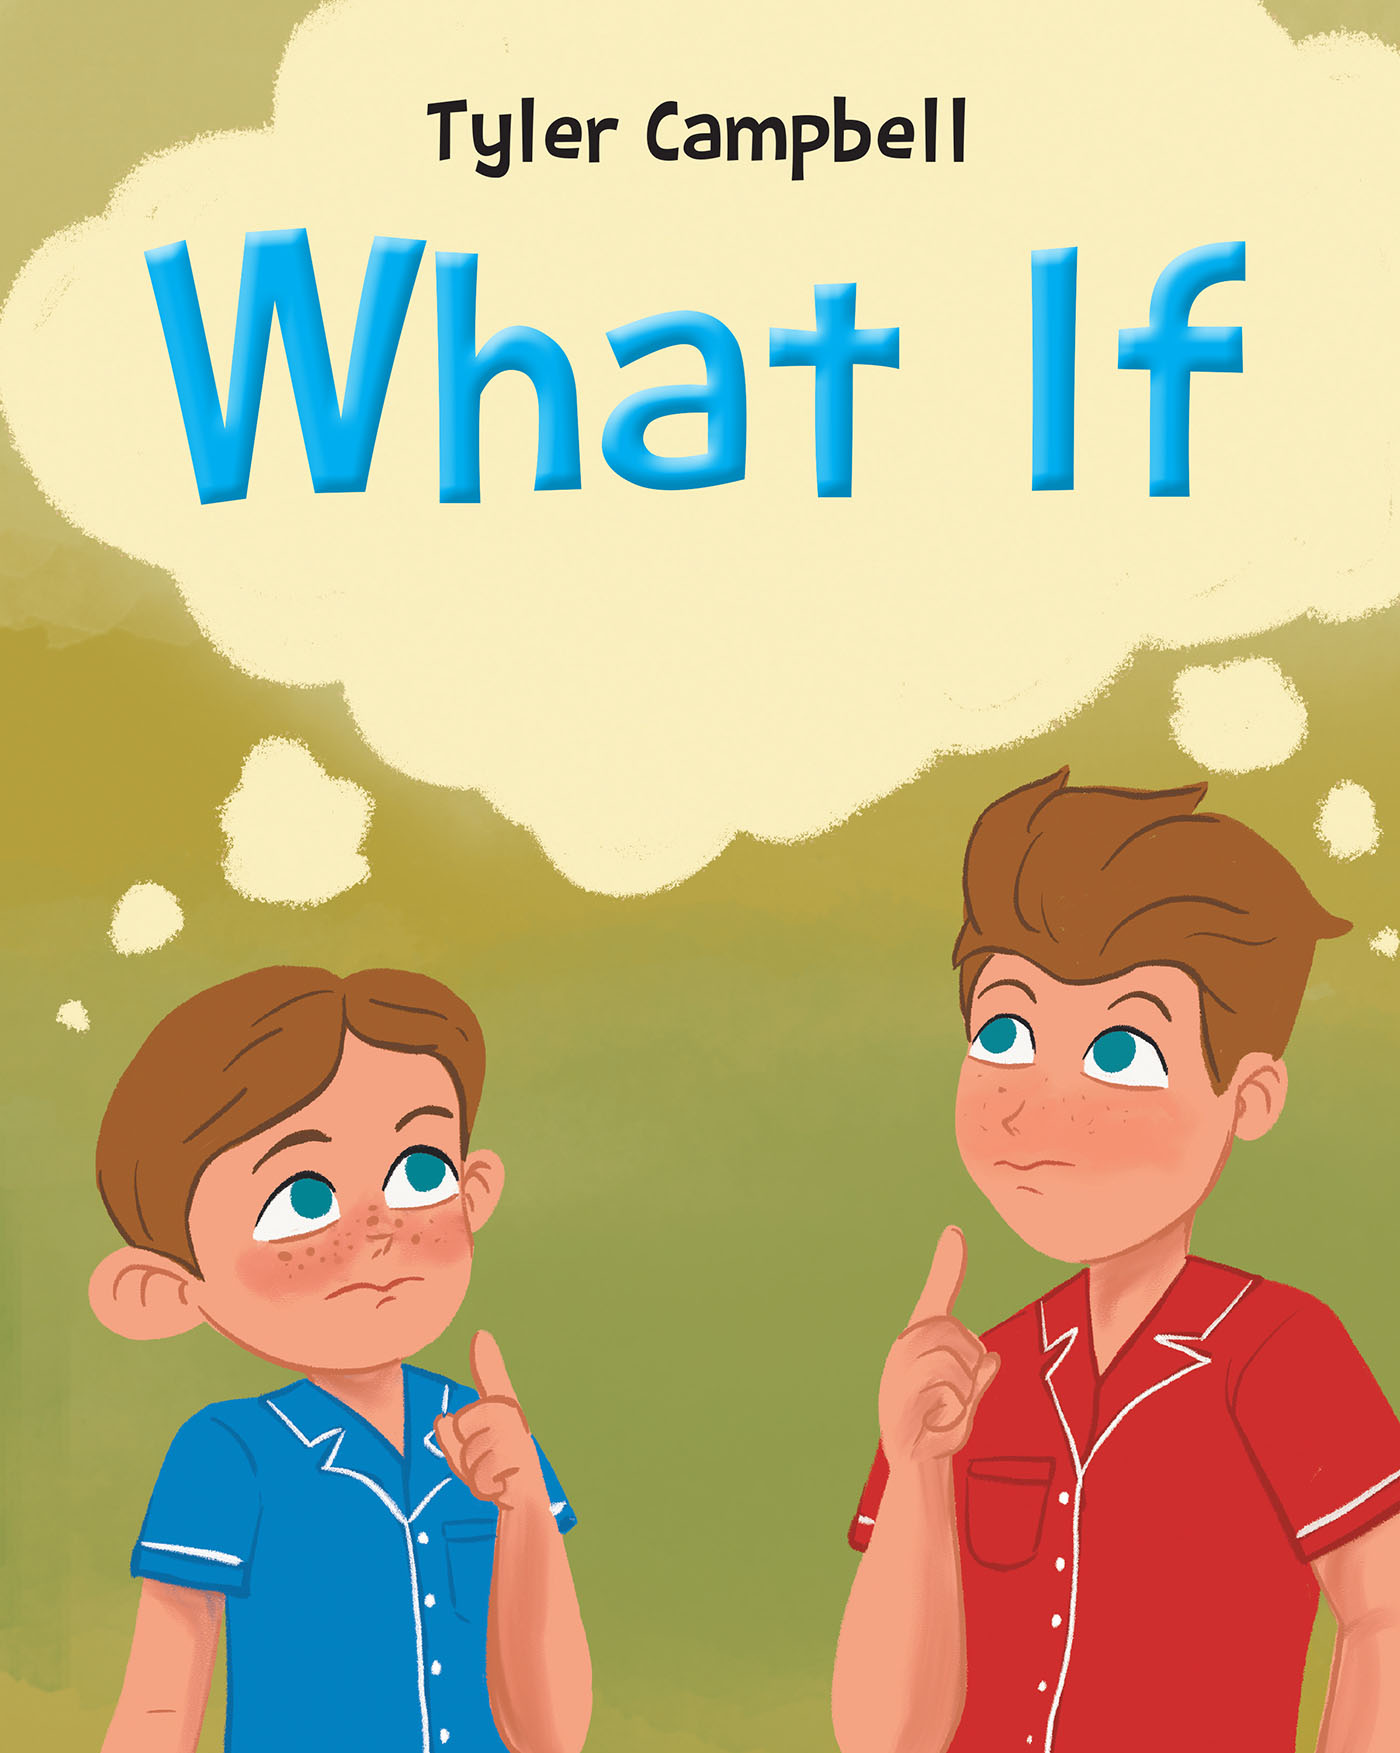 Tyler Campbell’s Newly Released "What If" Offers Readers a Simple and Impactful Spiritual Truth